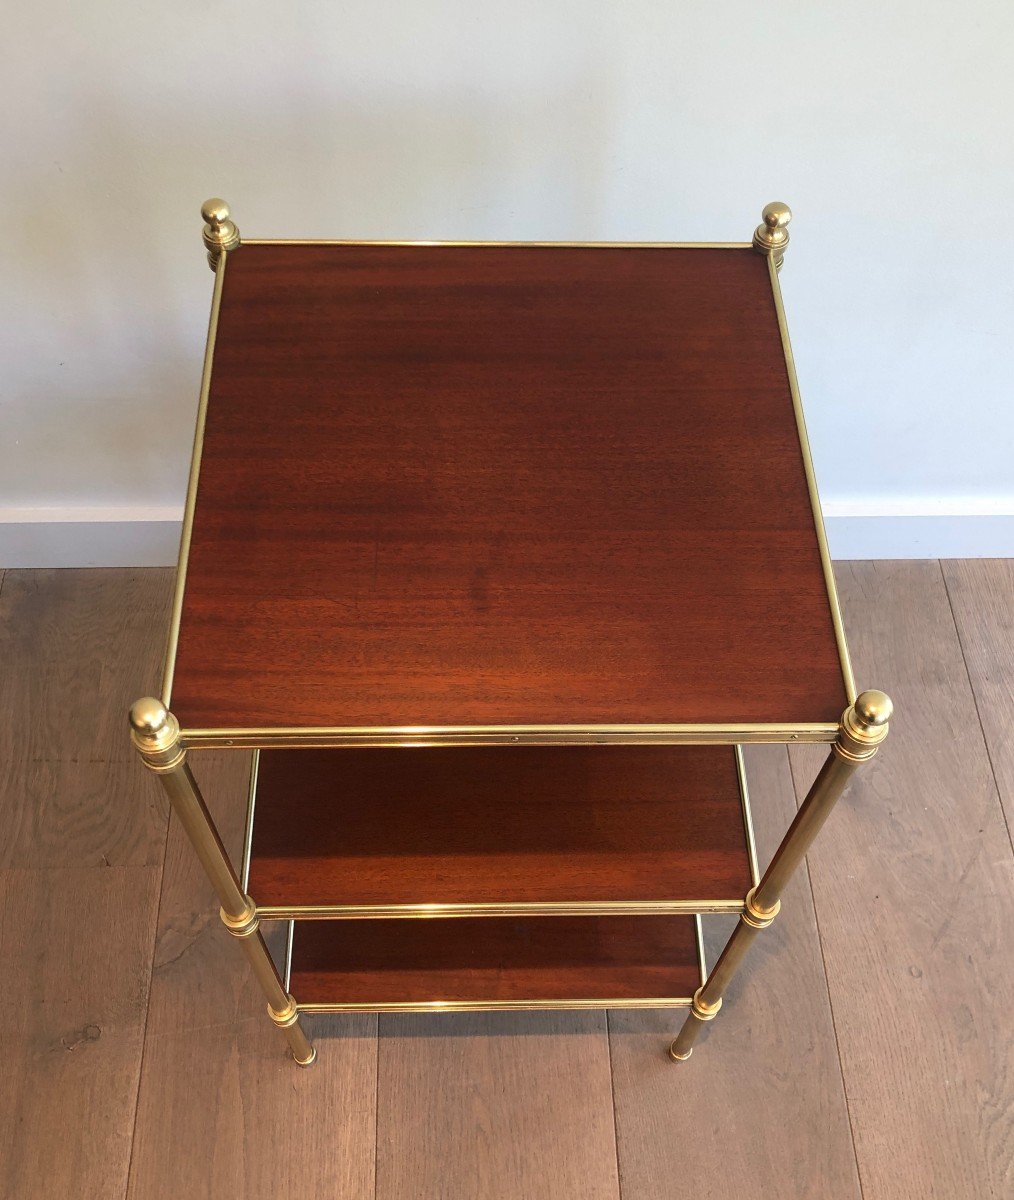 Three Shelves Mahogany And Brass Side Table. Bt Famous French Designer Maison Jansen. 1940's-photo-4